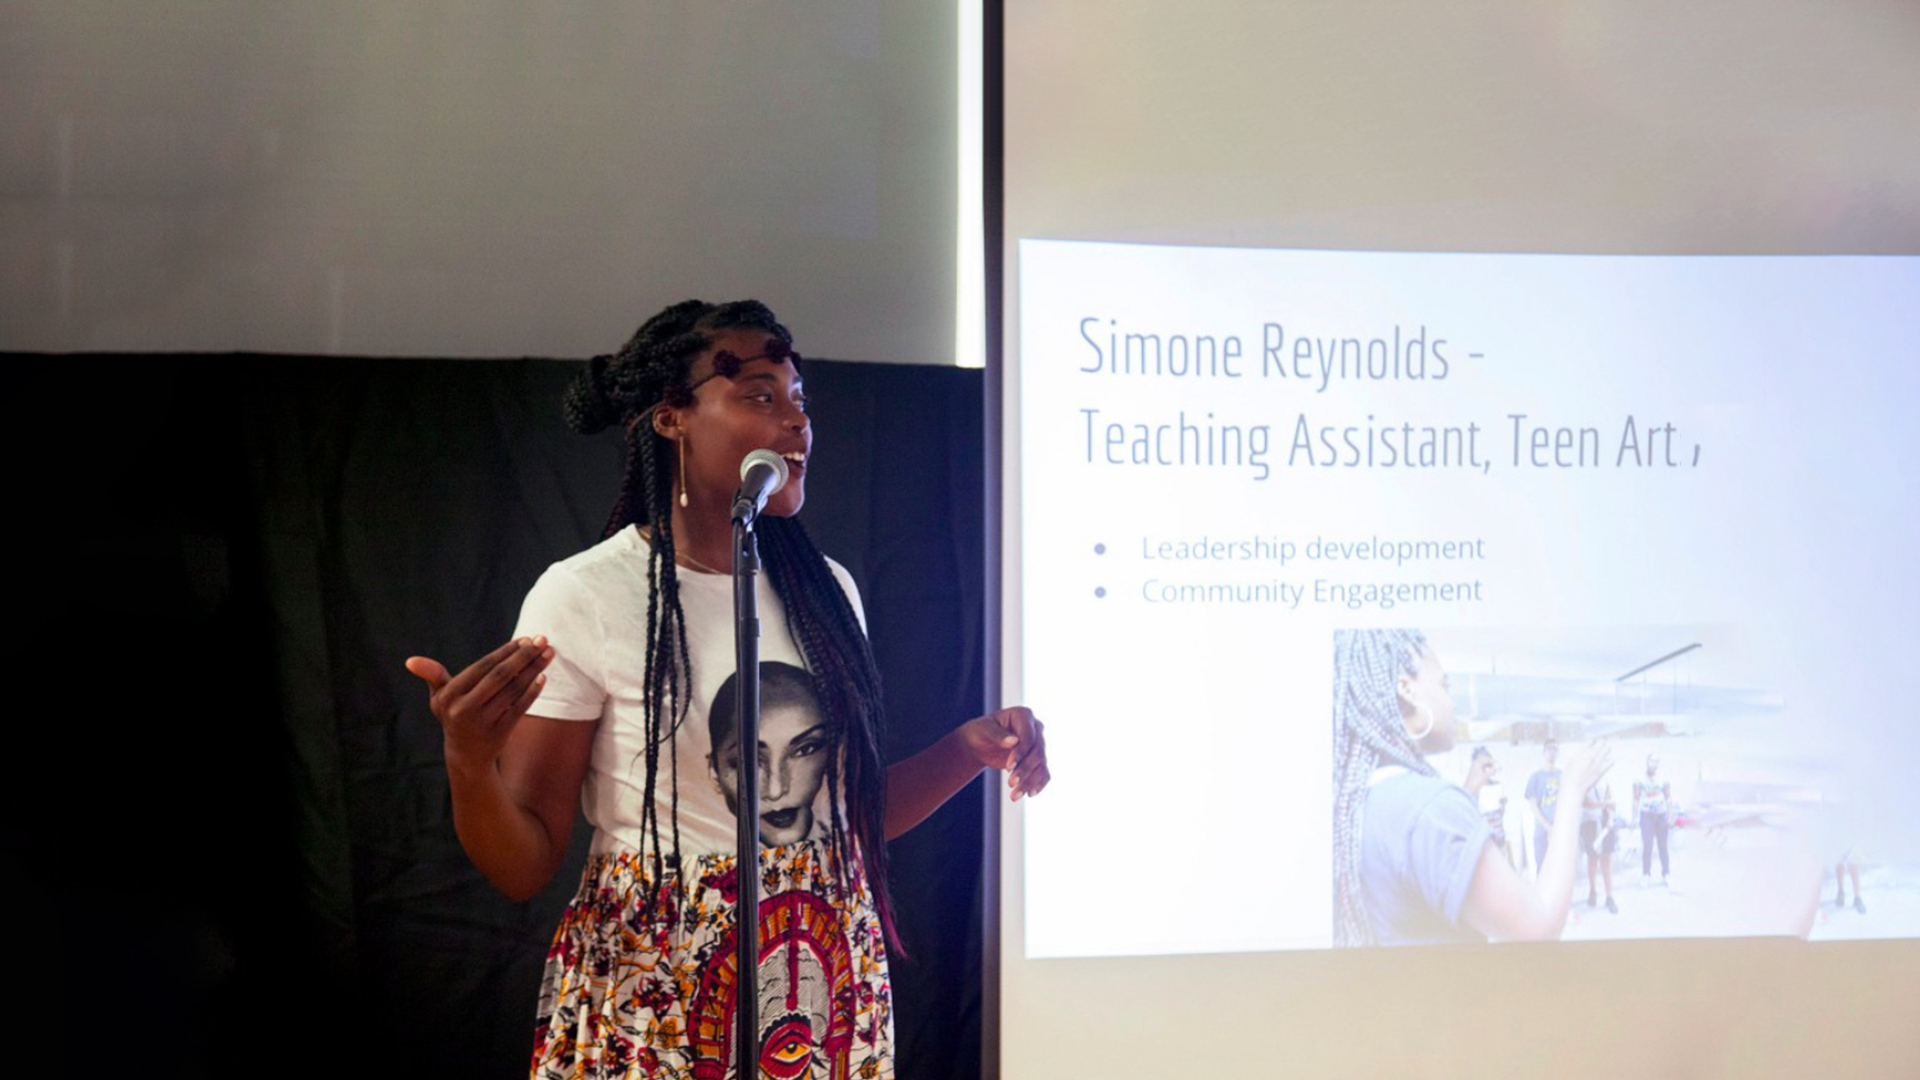 Simone, a tall dark-skinned person, wearing a Sade graphic t-shirt and multi-colored Ankara skirt, is standing at a mic in front of a presentation projected onto the screen. She is describing her work as an intern at Arts + Public Life.